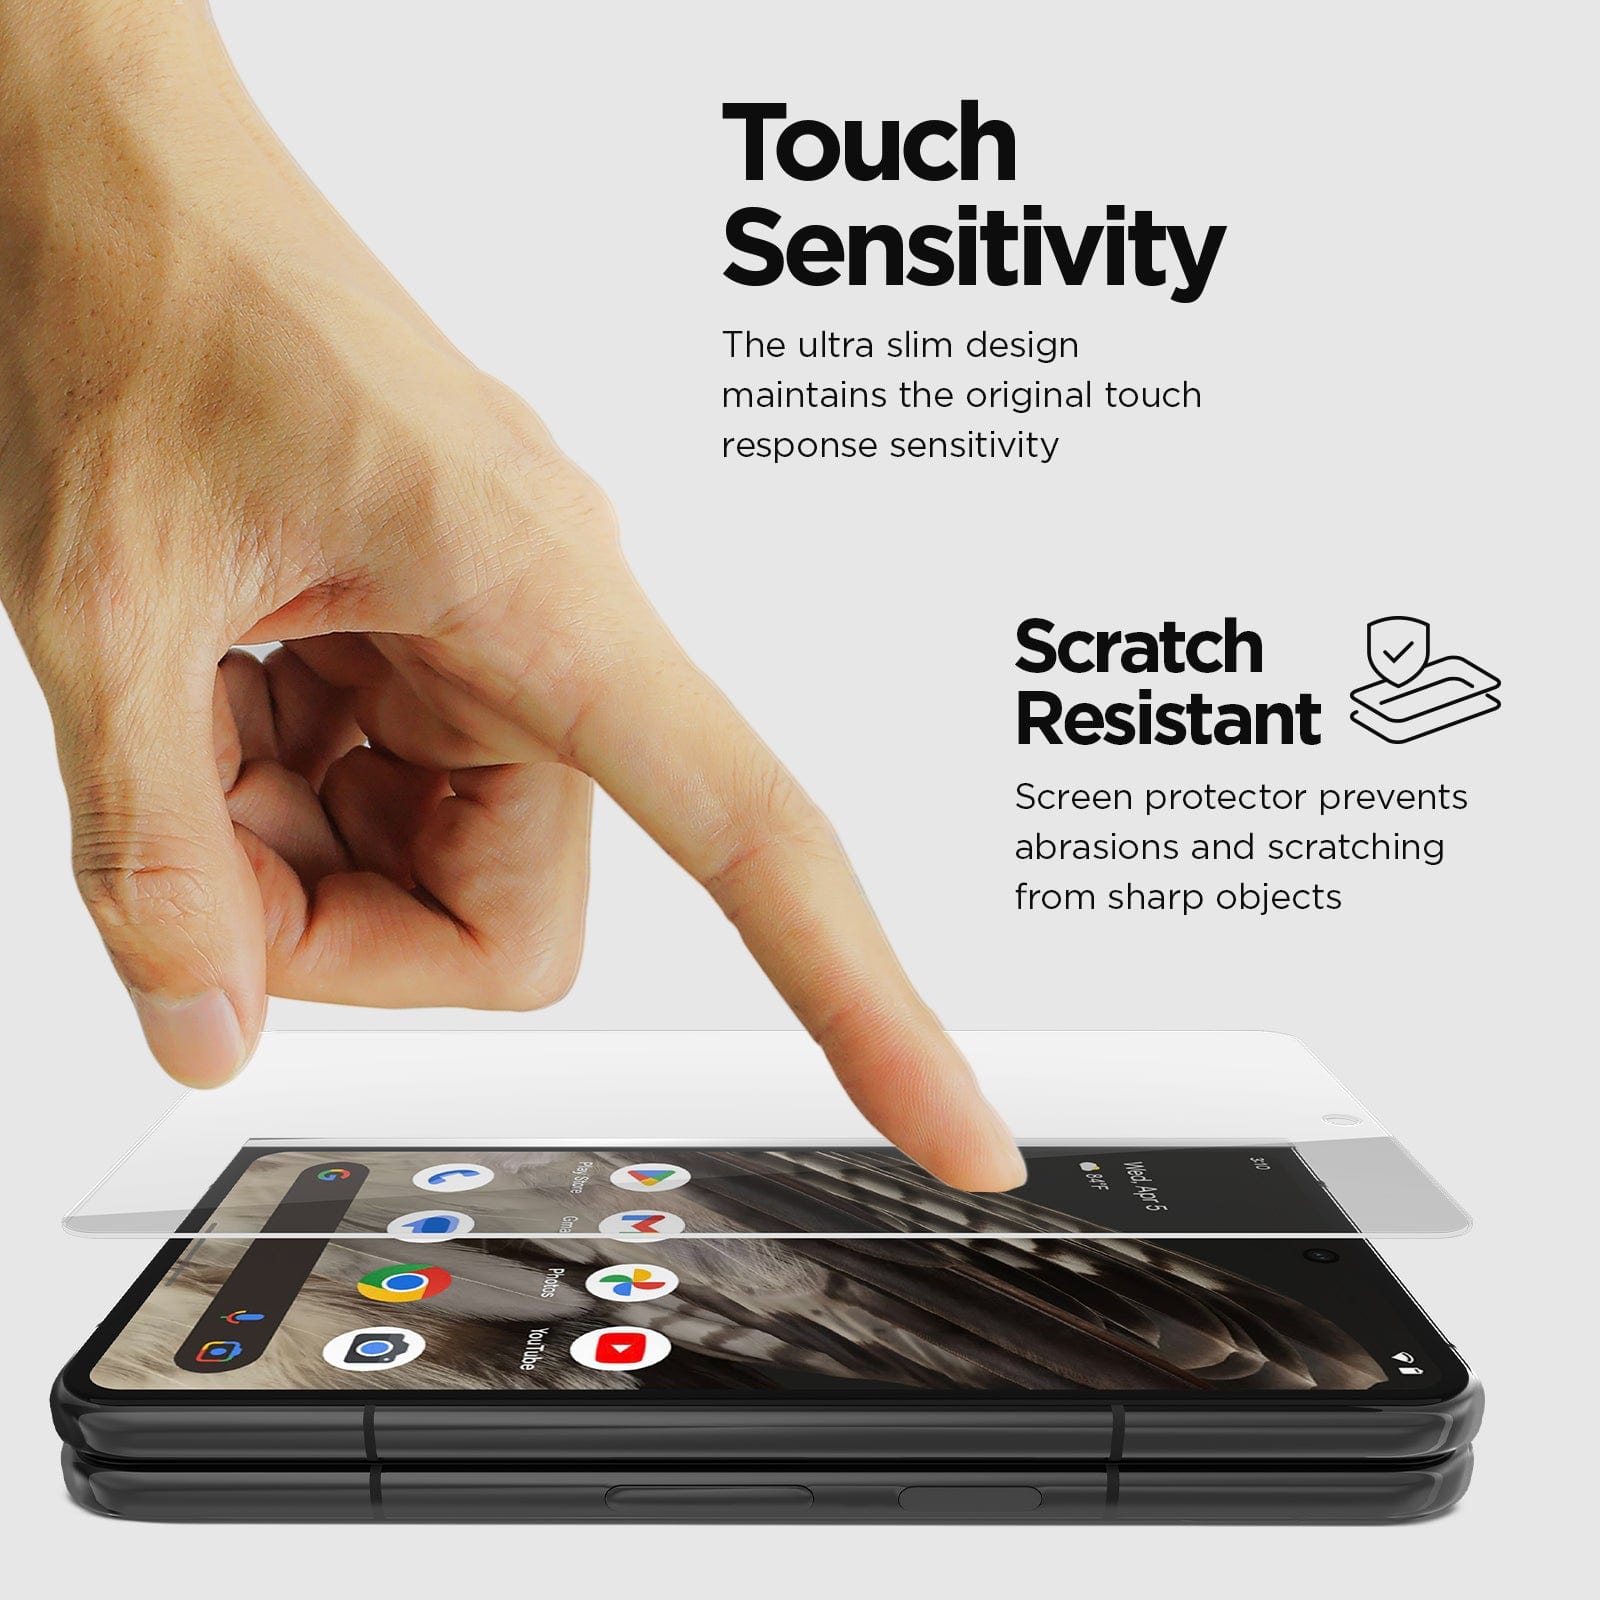 TOUCH SENSITIVITY. THE ULTRA SLIM DESIGN MAINTAINS THE ORIGINAL TOUCH RESPONSE SENSITIVITY. SCRATCH RESISTANT SCREEN PROTECTOR PREVENTS ABRASIONS AND SCRATCHING FROM SHARO OBJECTS.